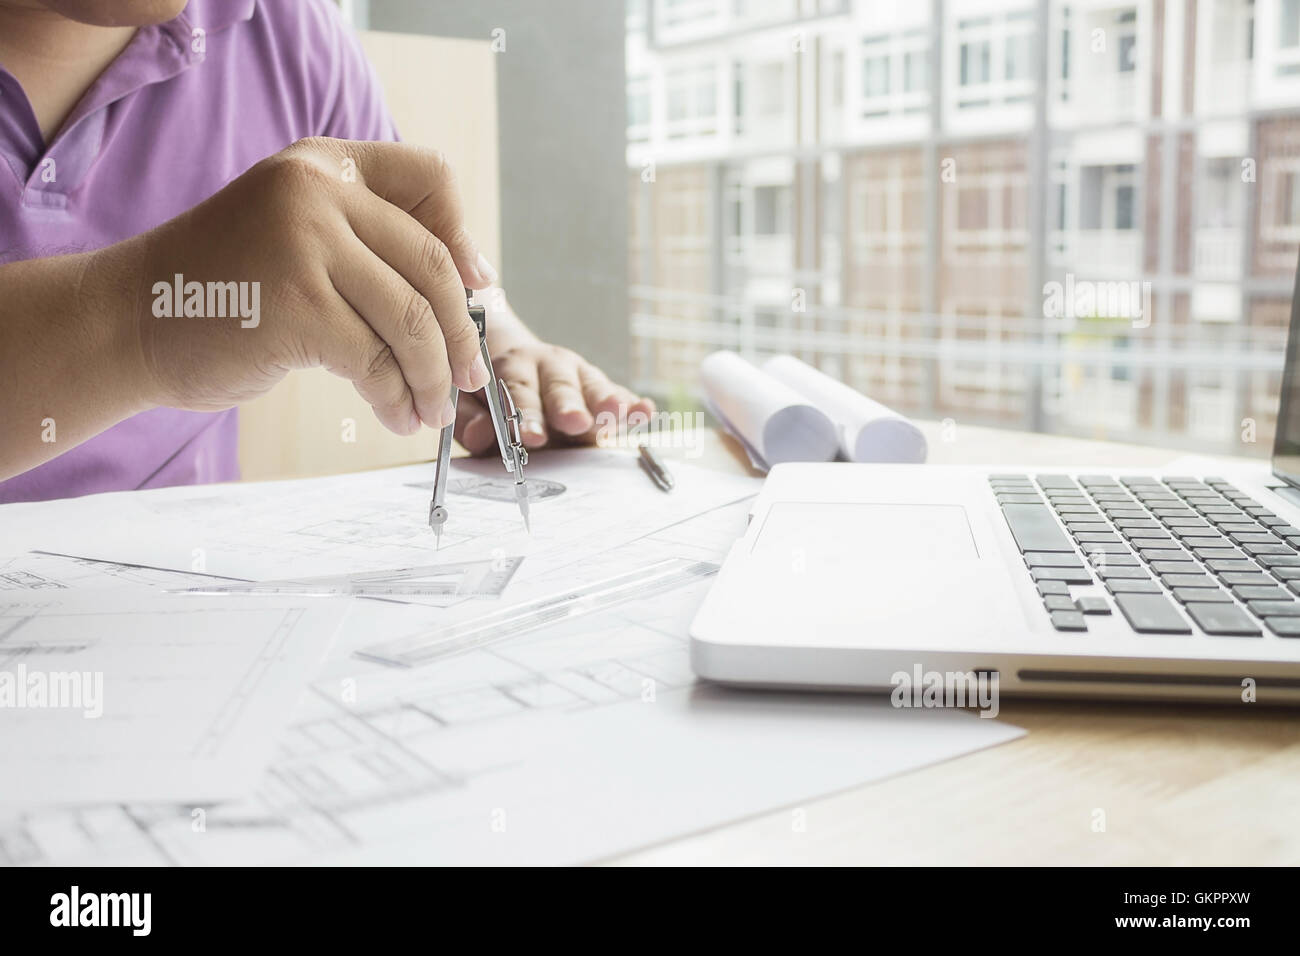 Engineer, project, working, engineering, tools, workplace, document, architectural, blueprint, paperwork, interaction, holding Stock Photo